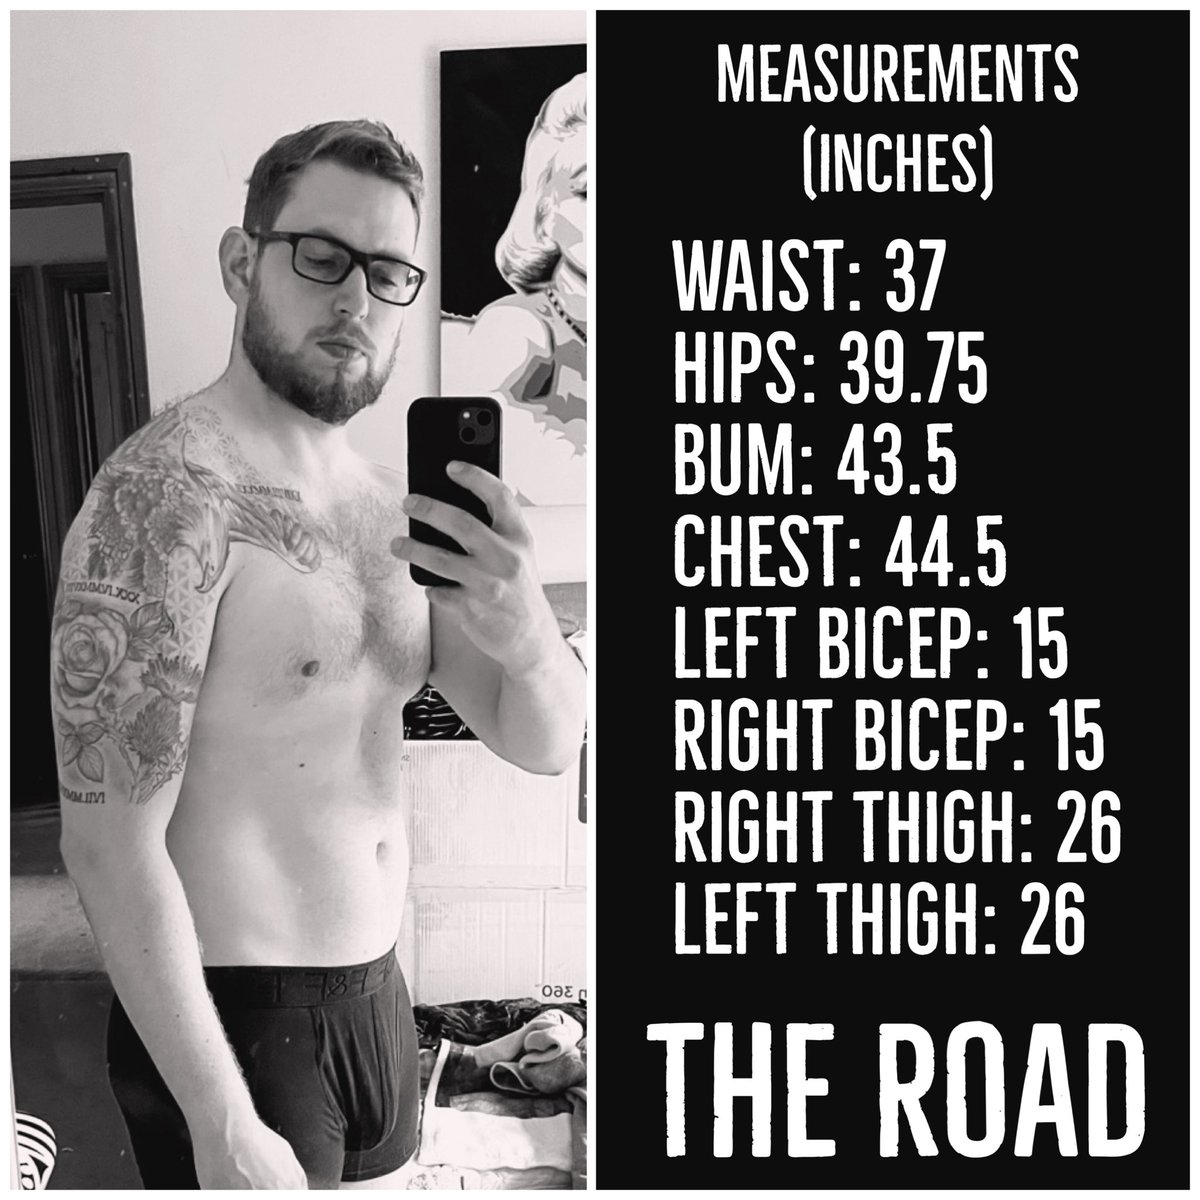 New measurements! Lets have got much bigger, waist a bit smaller but otherwise no real change. Pre season starts soon! #rugbyfit #theroad